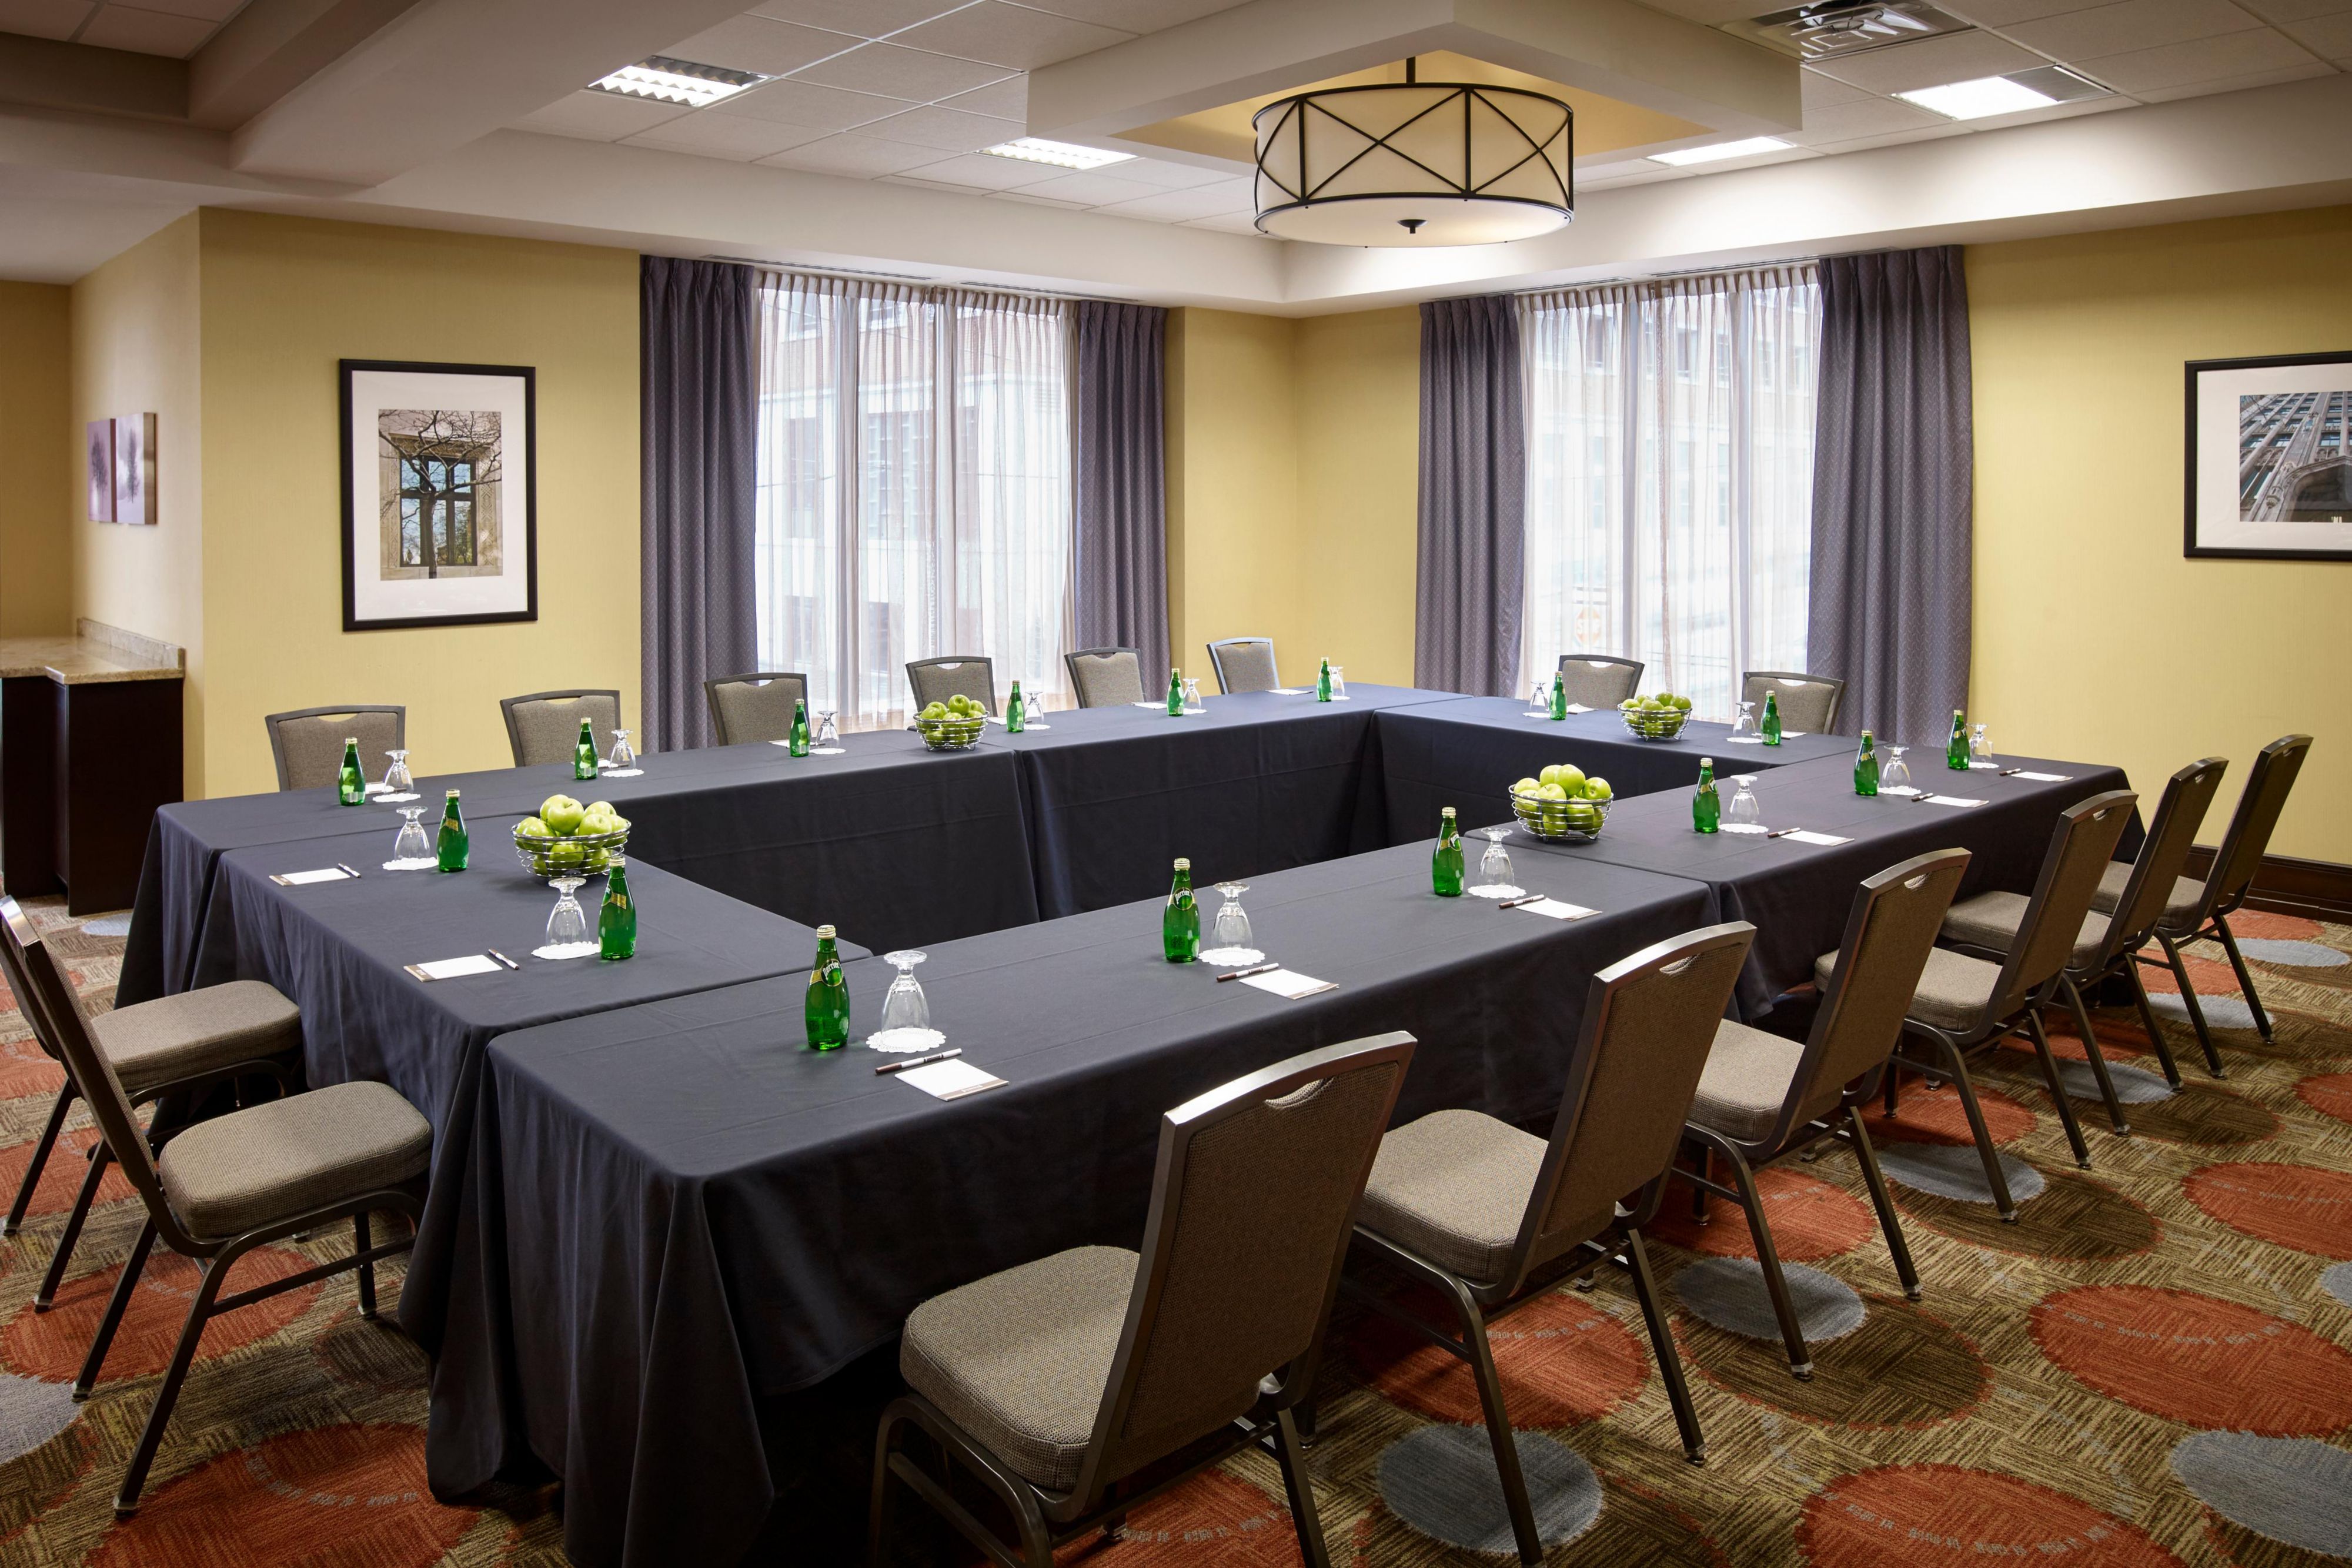 We're committed to high levels of cleanliness. That means, clutter free event spaces and an experience that supports the wellbeing of your attendees. We'll make sure your event is just right. Ask us today about our Meeting with Confidence offer and IHG Business Rewards Points for Planners and Bookers.